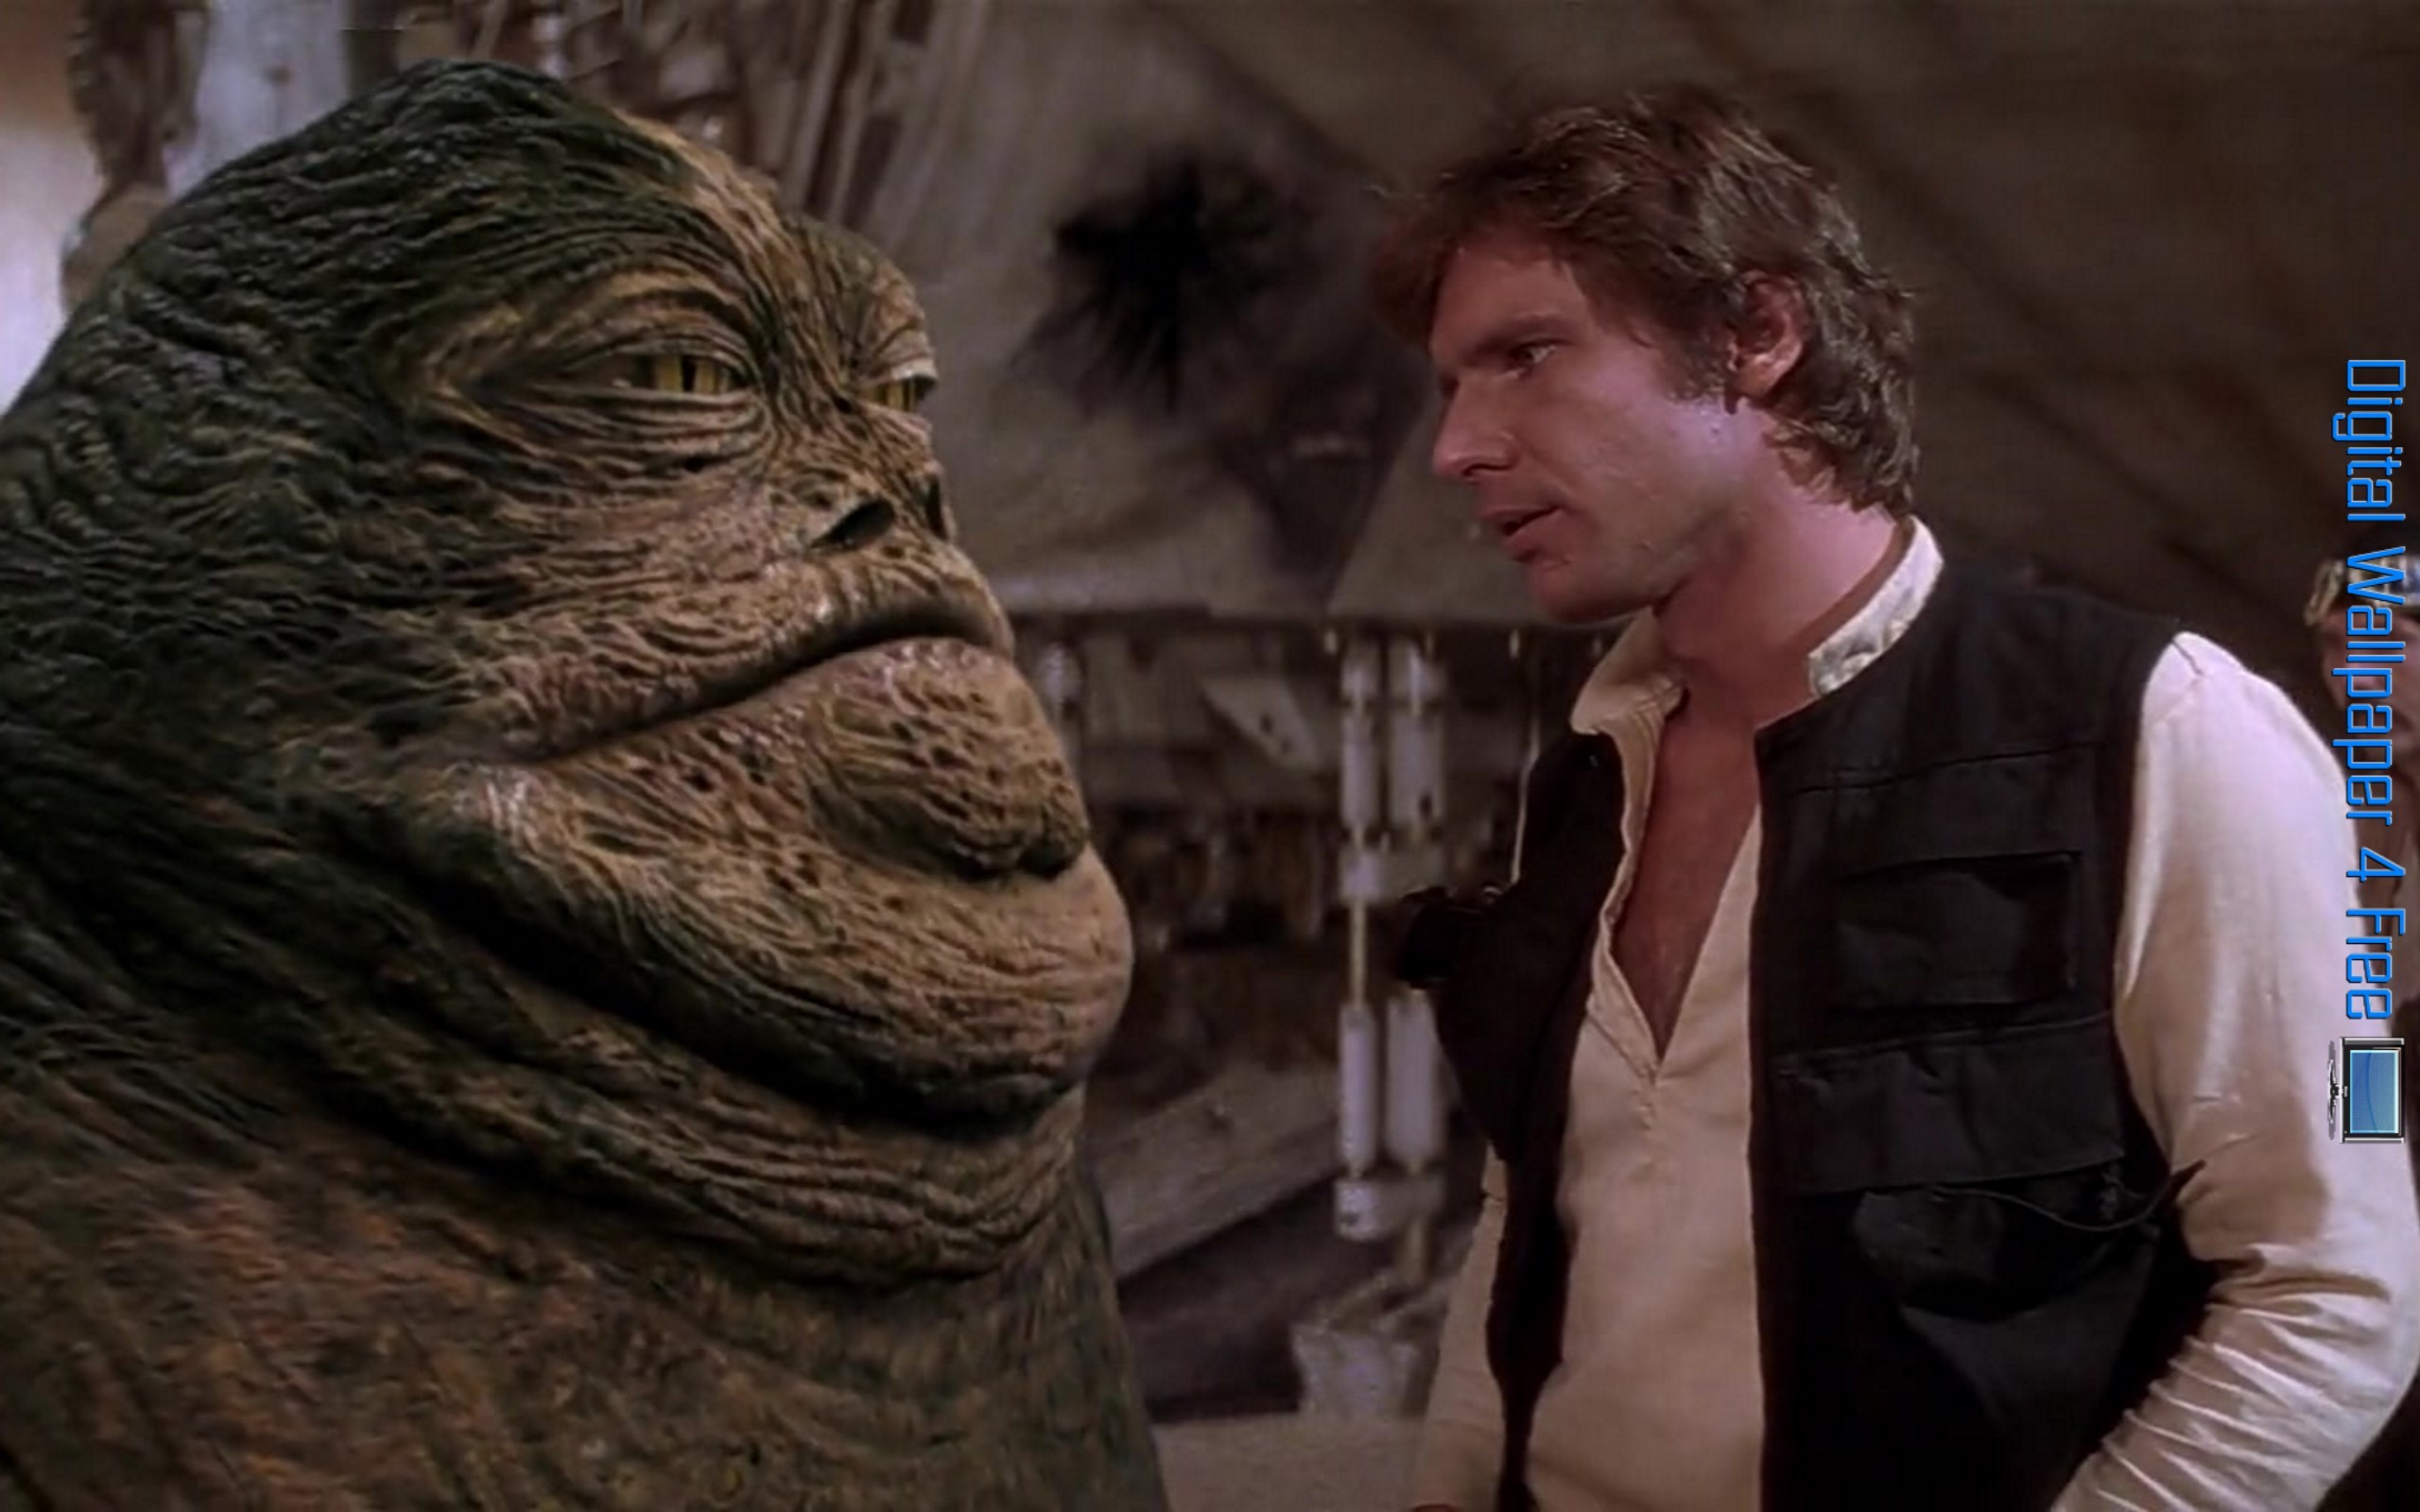 2560x1600 Star Wars Episode 4 Han Solo And Jabba The Hut 002 - Digital Wallpaper 4  Free